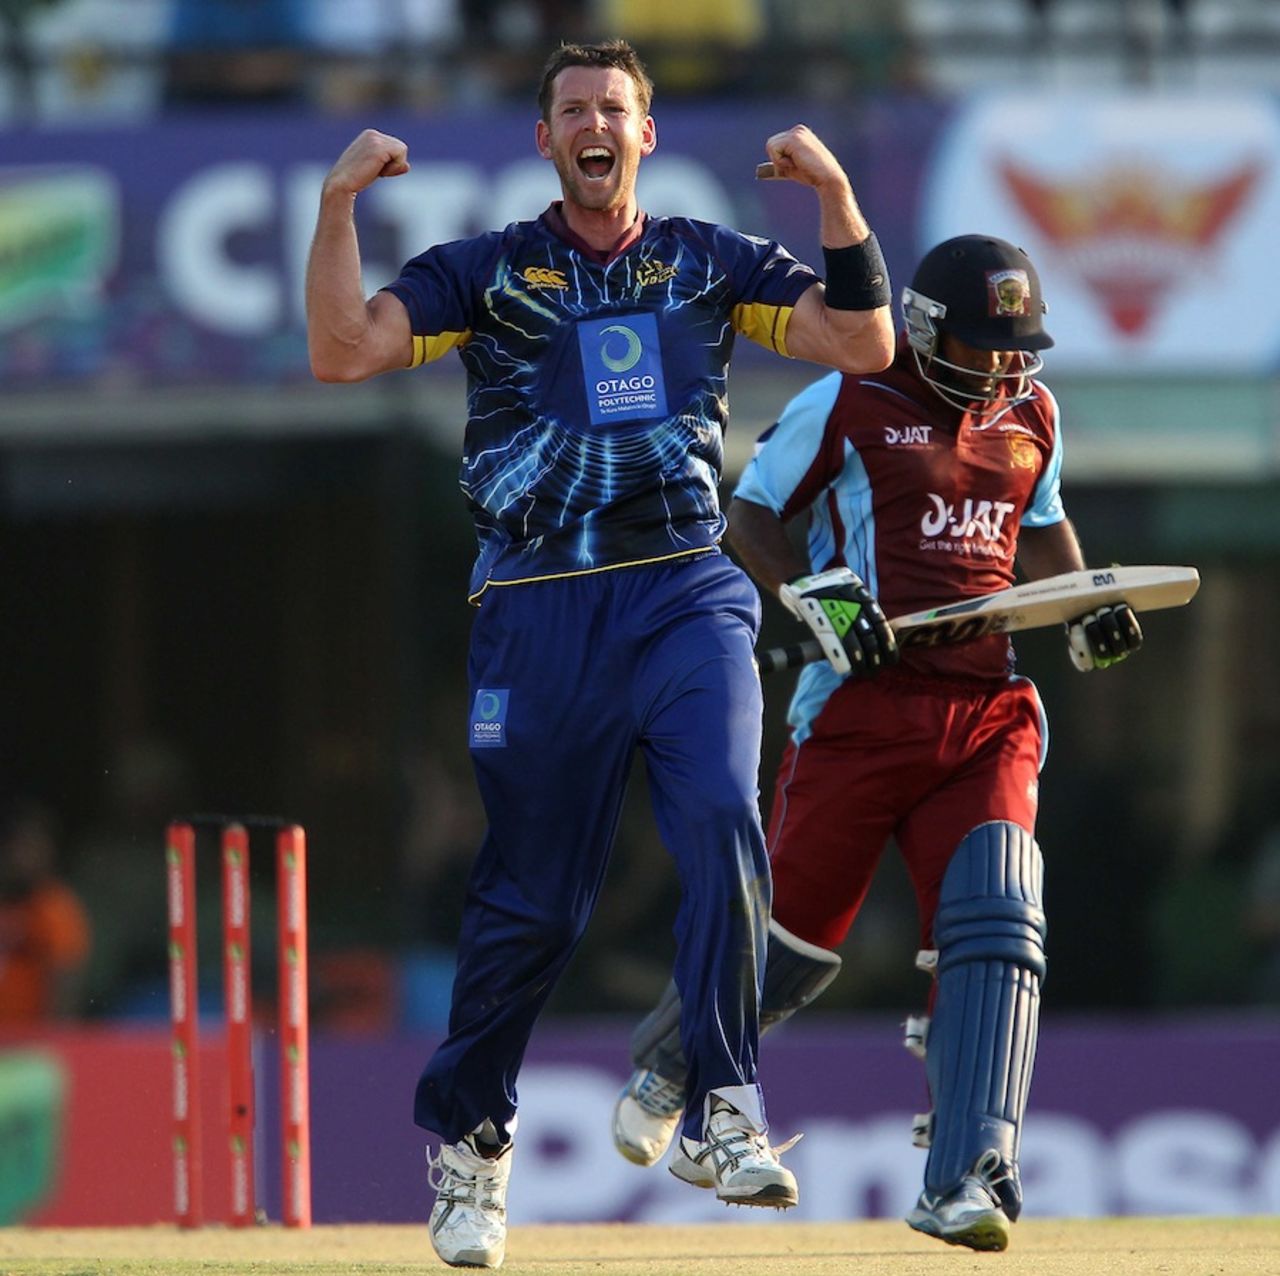 Ian Butler is pumped after trapping Chamara Silva in front, Kandurata Maroons v Otago Volts, Champions League qualifiers, Mohali, September 18, 2013